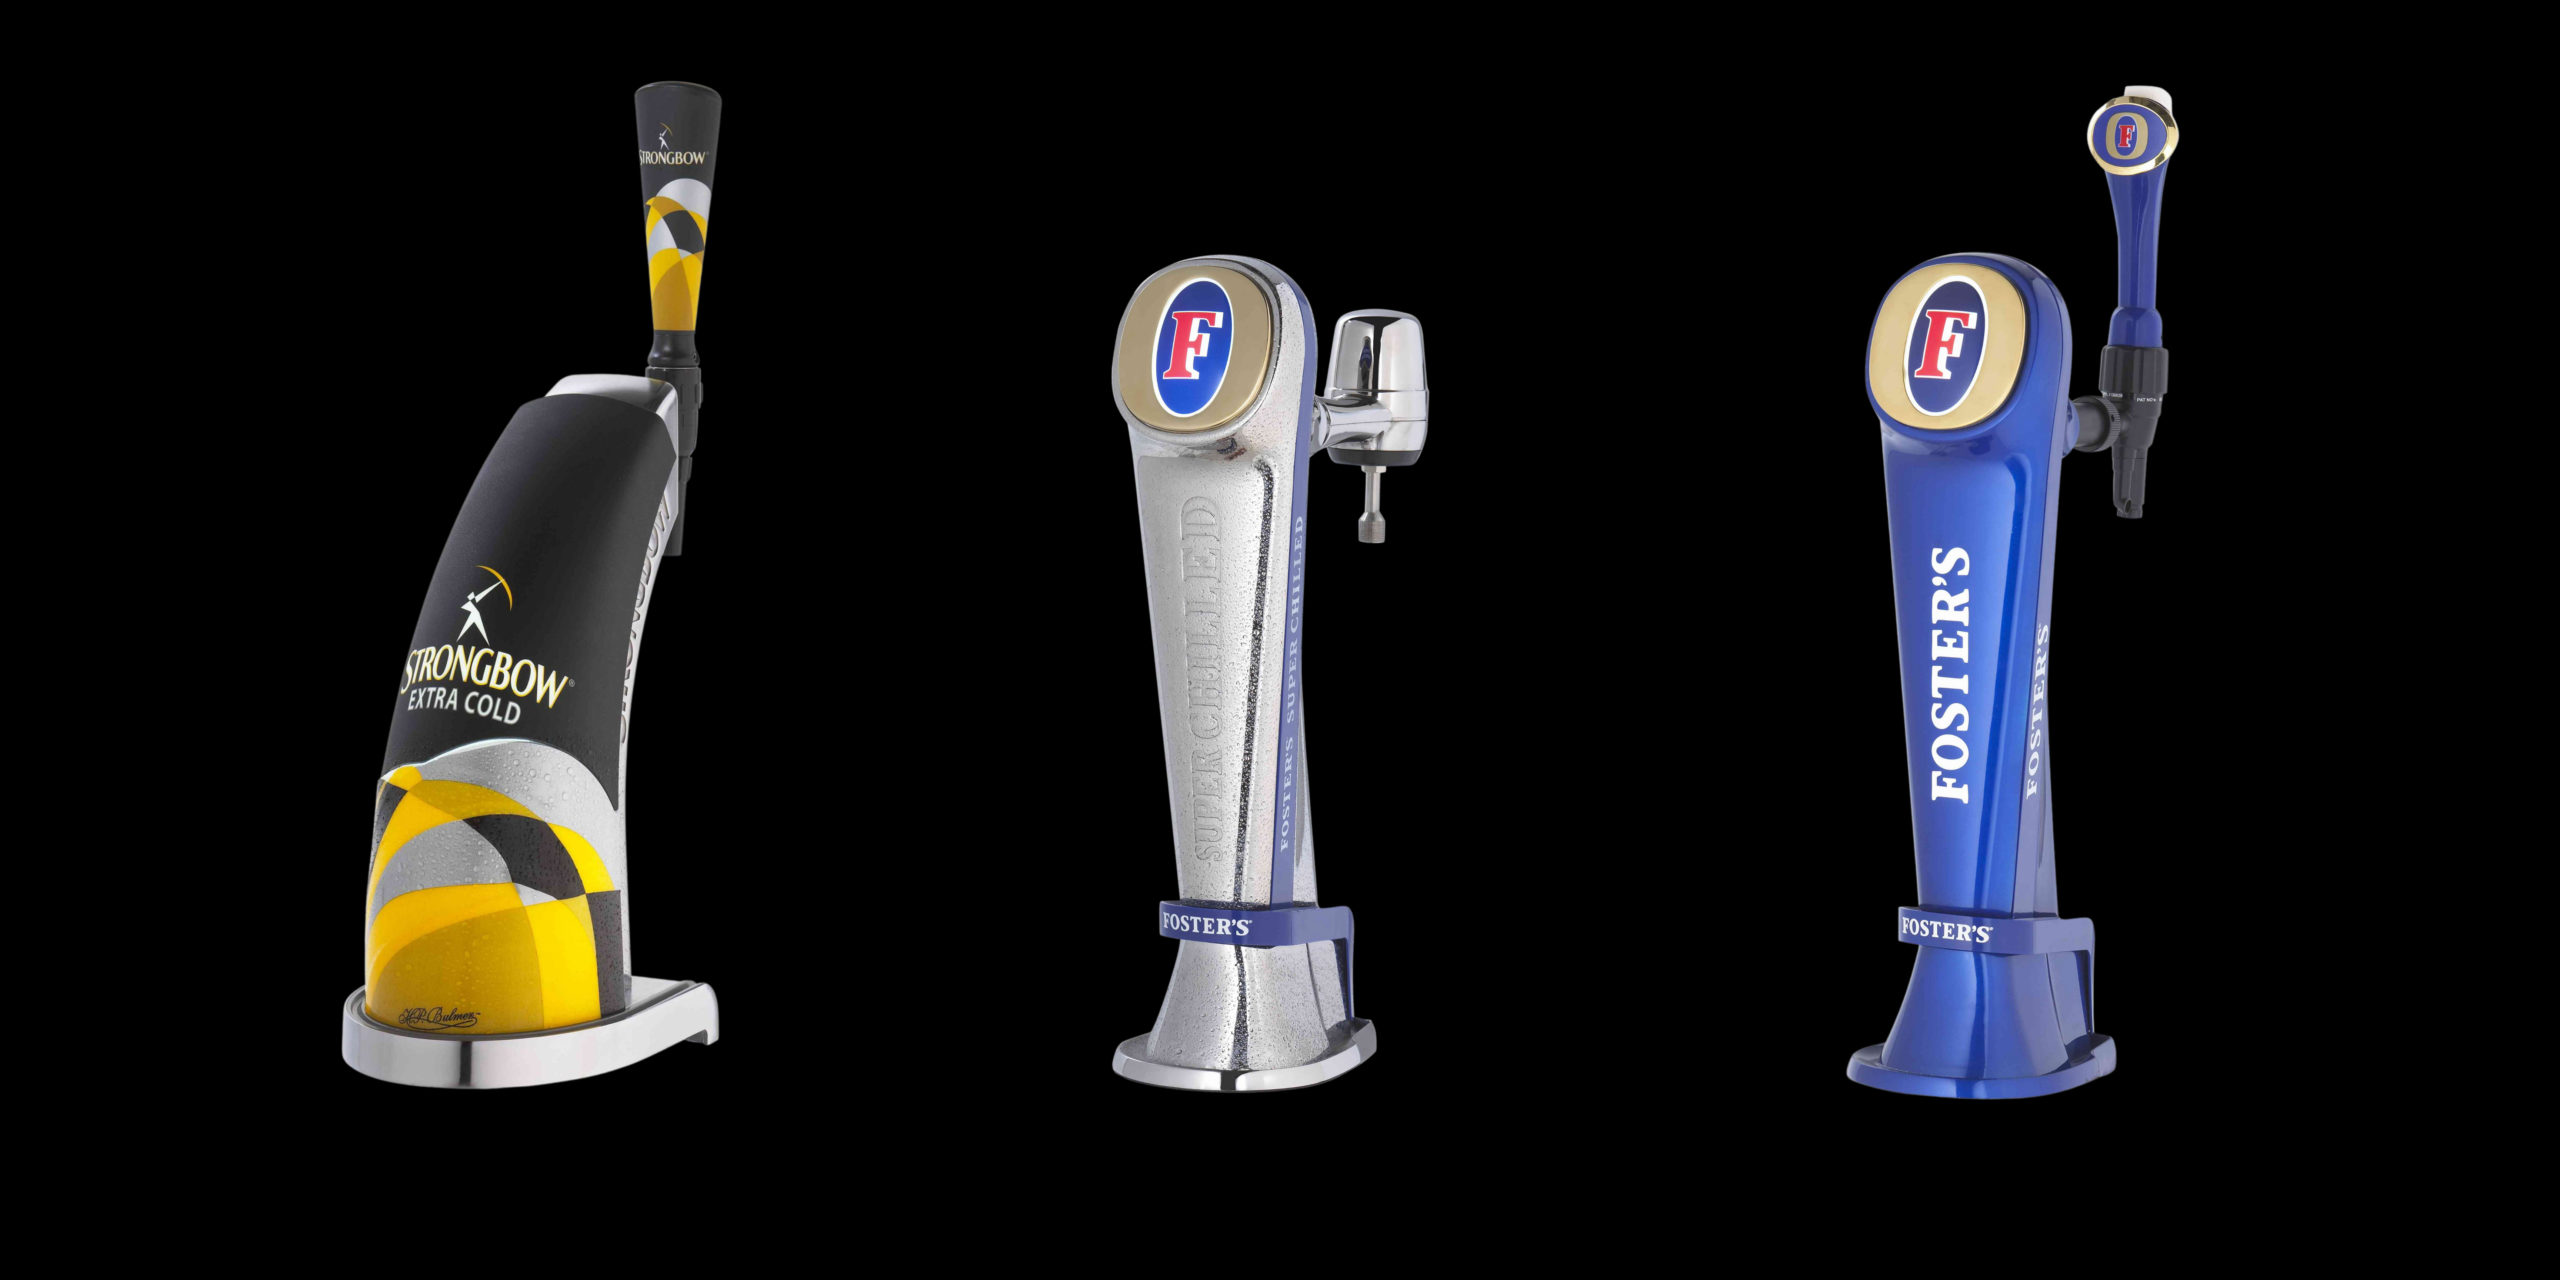 Complex Ergonomic Razor Handles Including Intricate Features and Over Mouldings